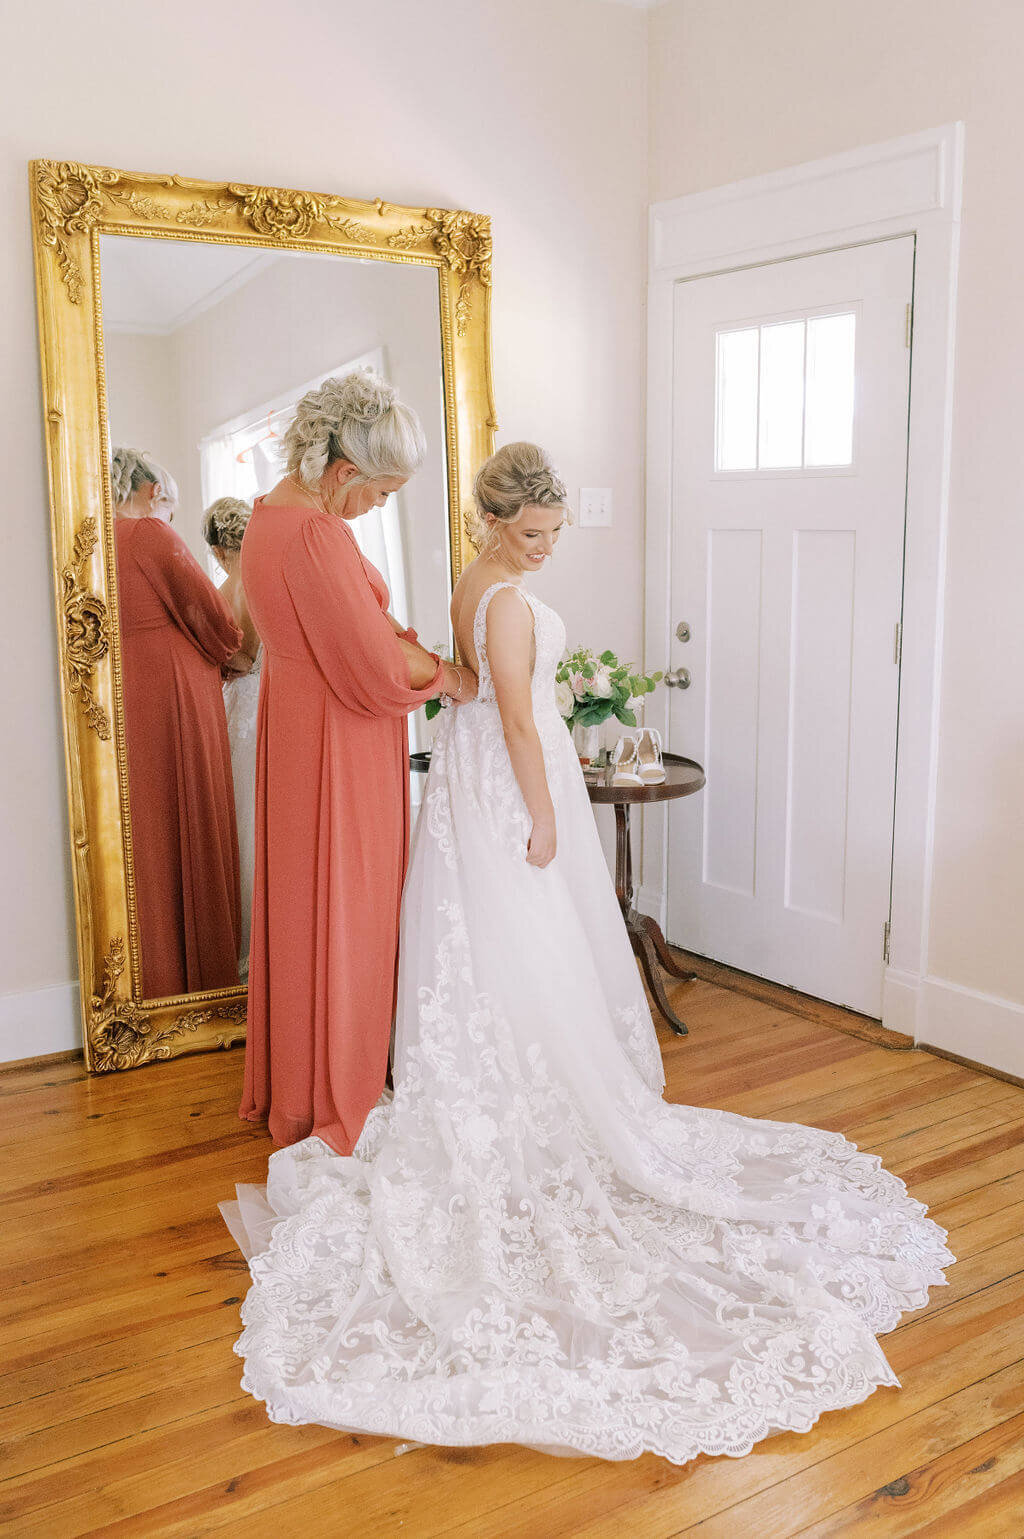 Bride's mom wearing coral dress and zipping bride into wedding gown